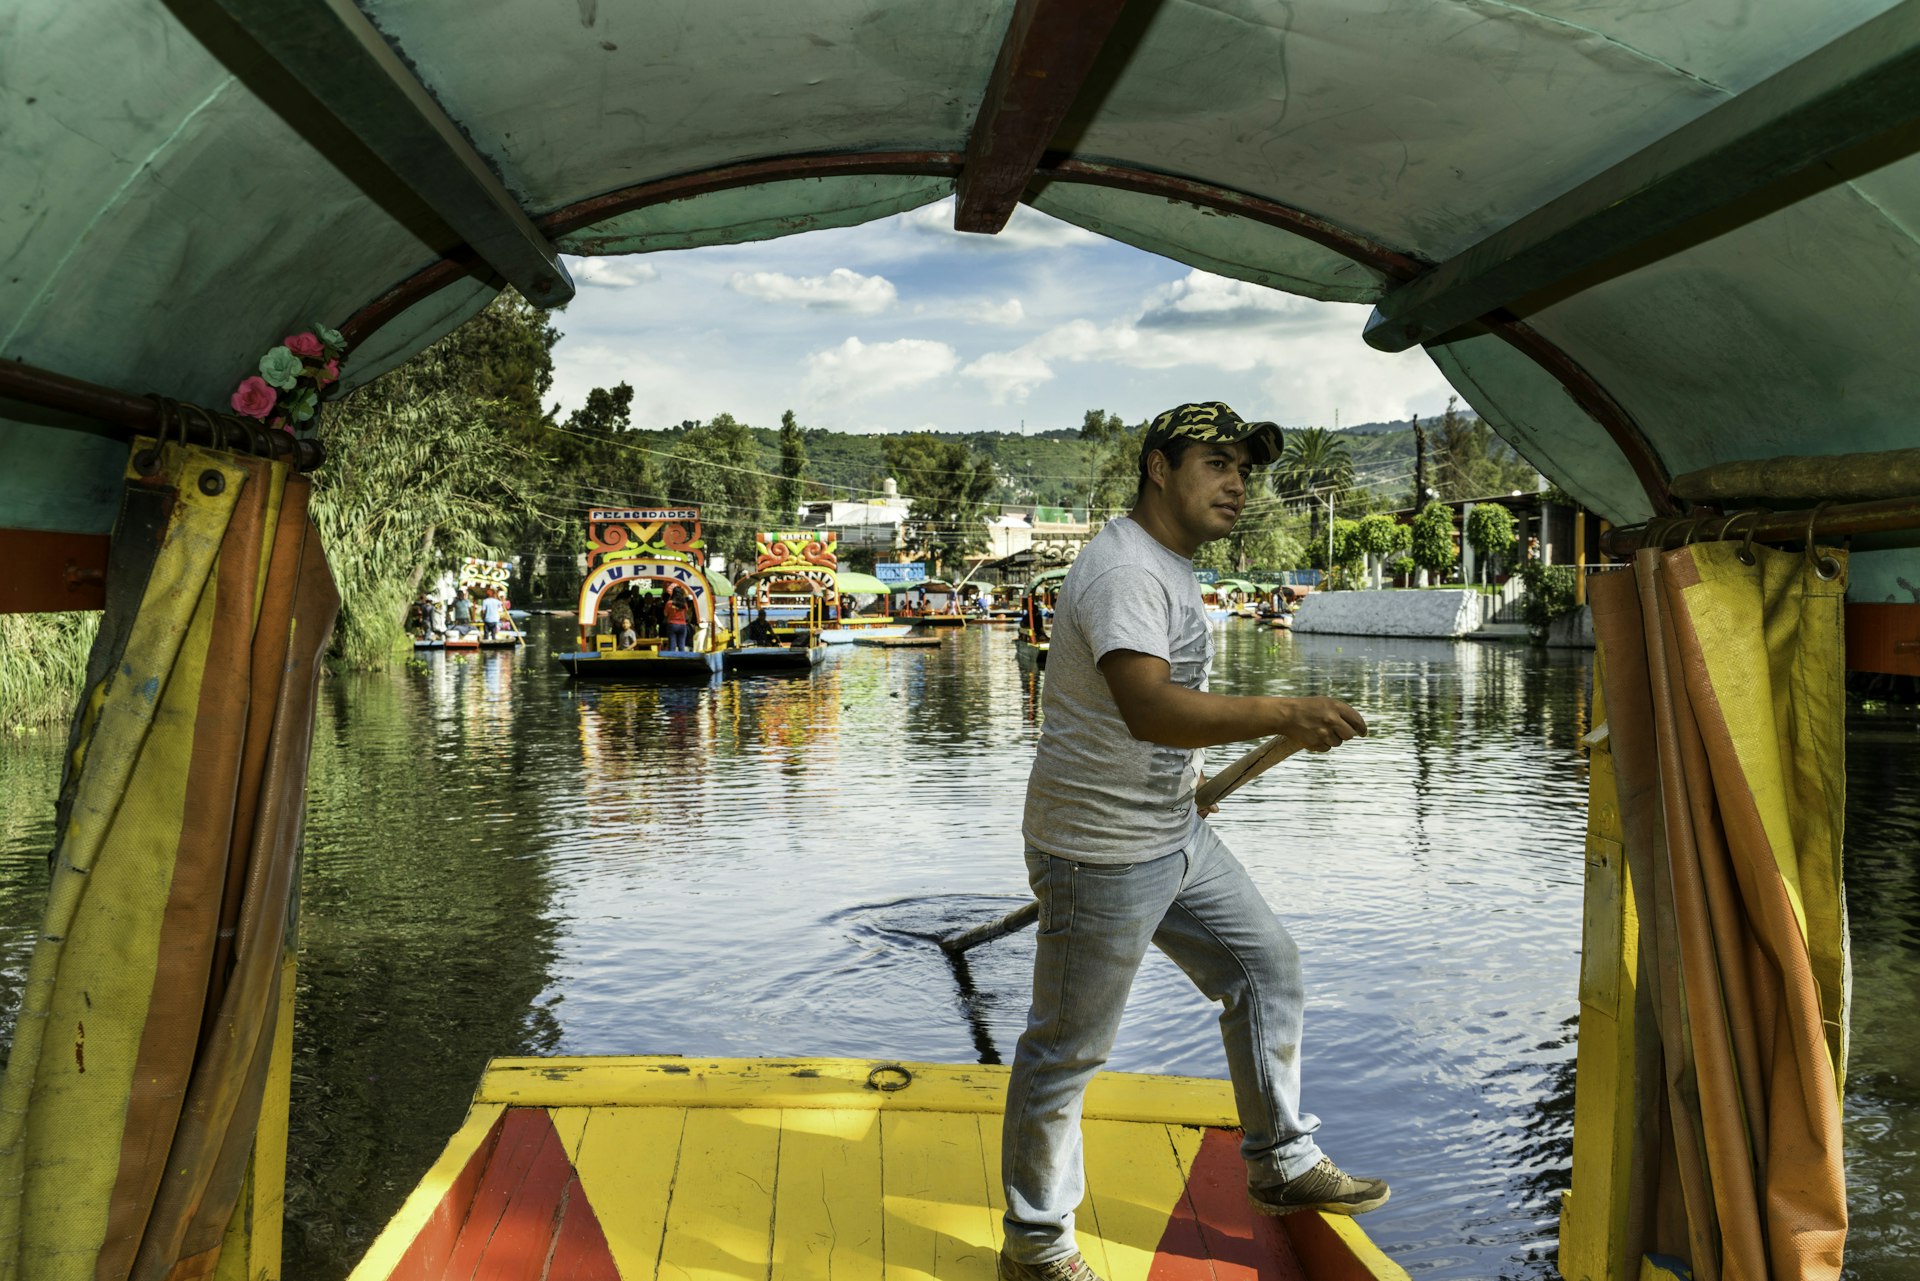 A man punts on a boat called a trajinera on the canals of Xochimilco in Mexico City